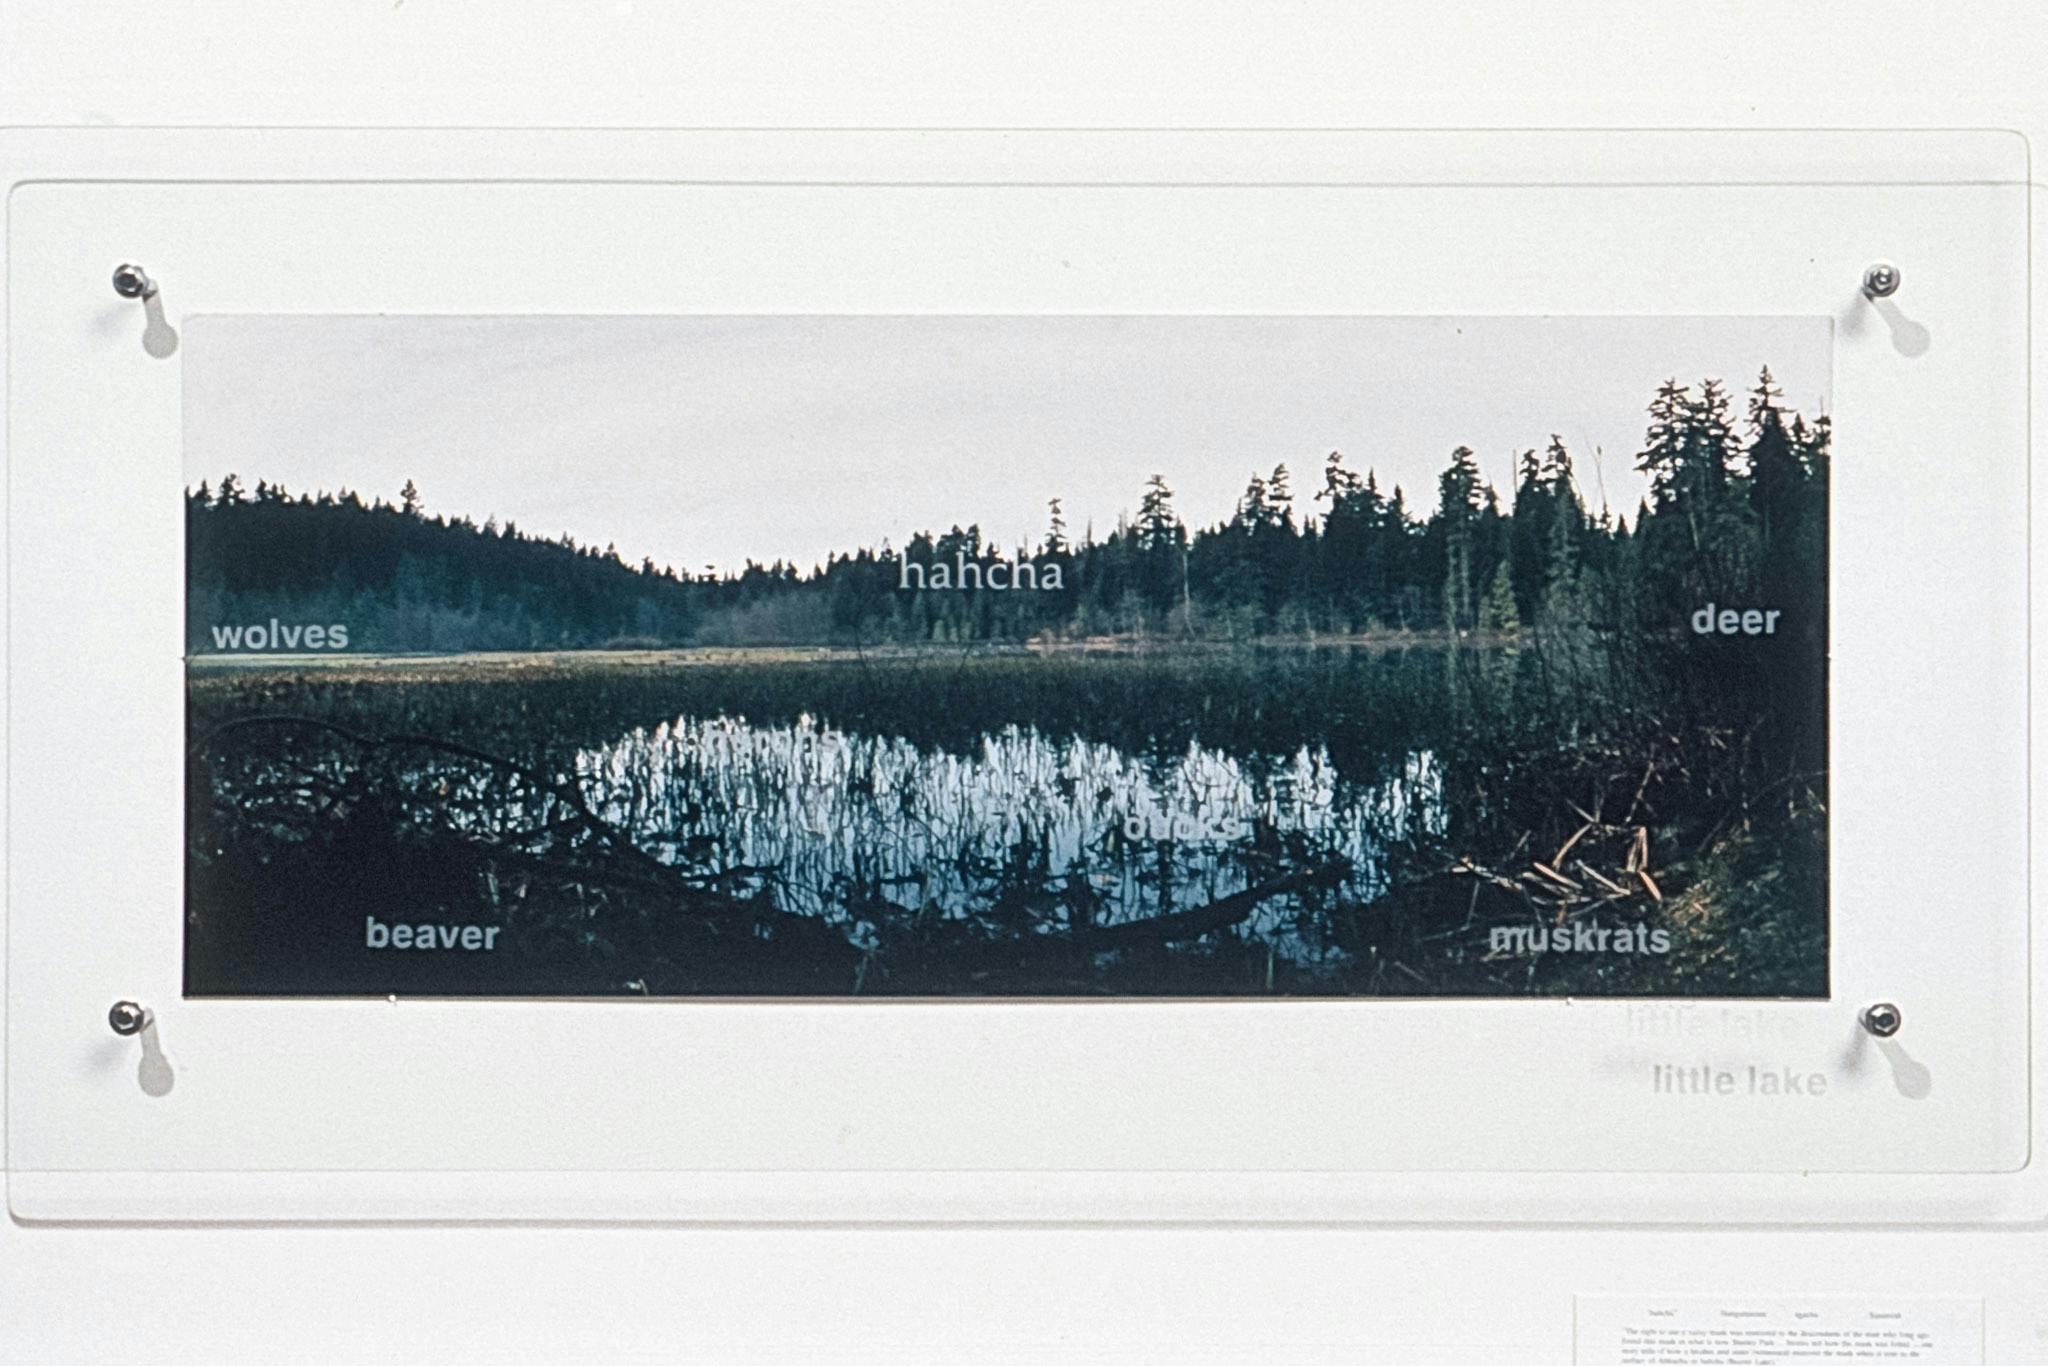 A panoramic photo of a landscape mounted on a wall between 2 panes of glass. The pane on top is engraved with "hahcha" an adaptation of the traditional Squamish name for Beaver Lake in Stanley Park.